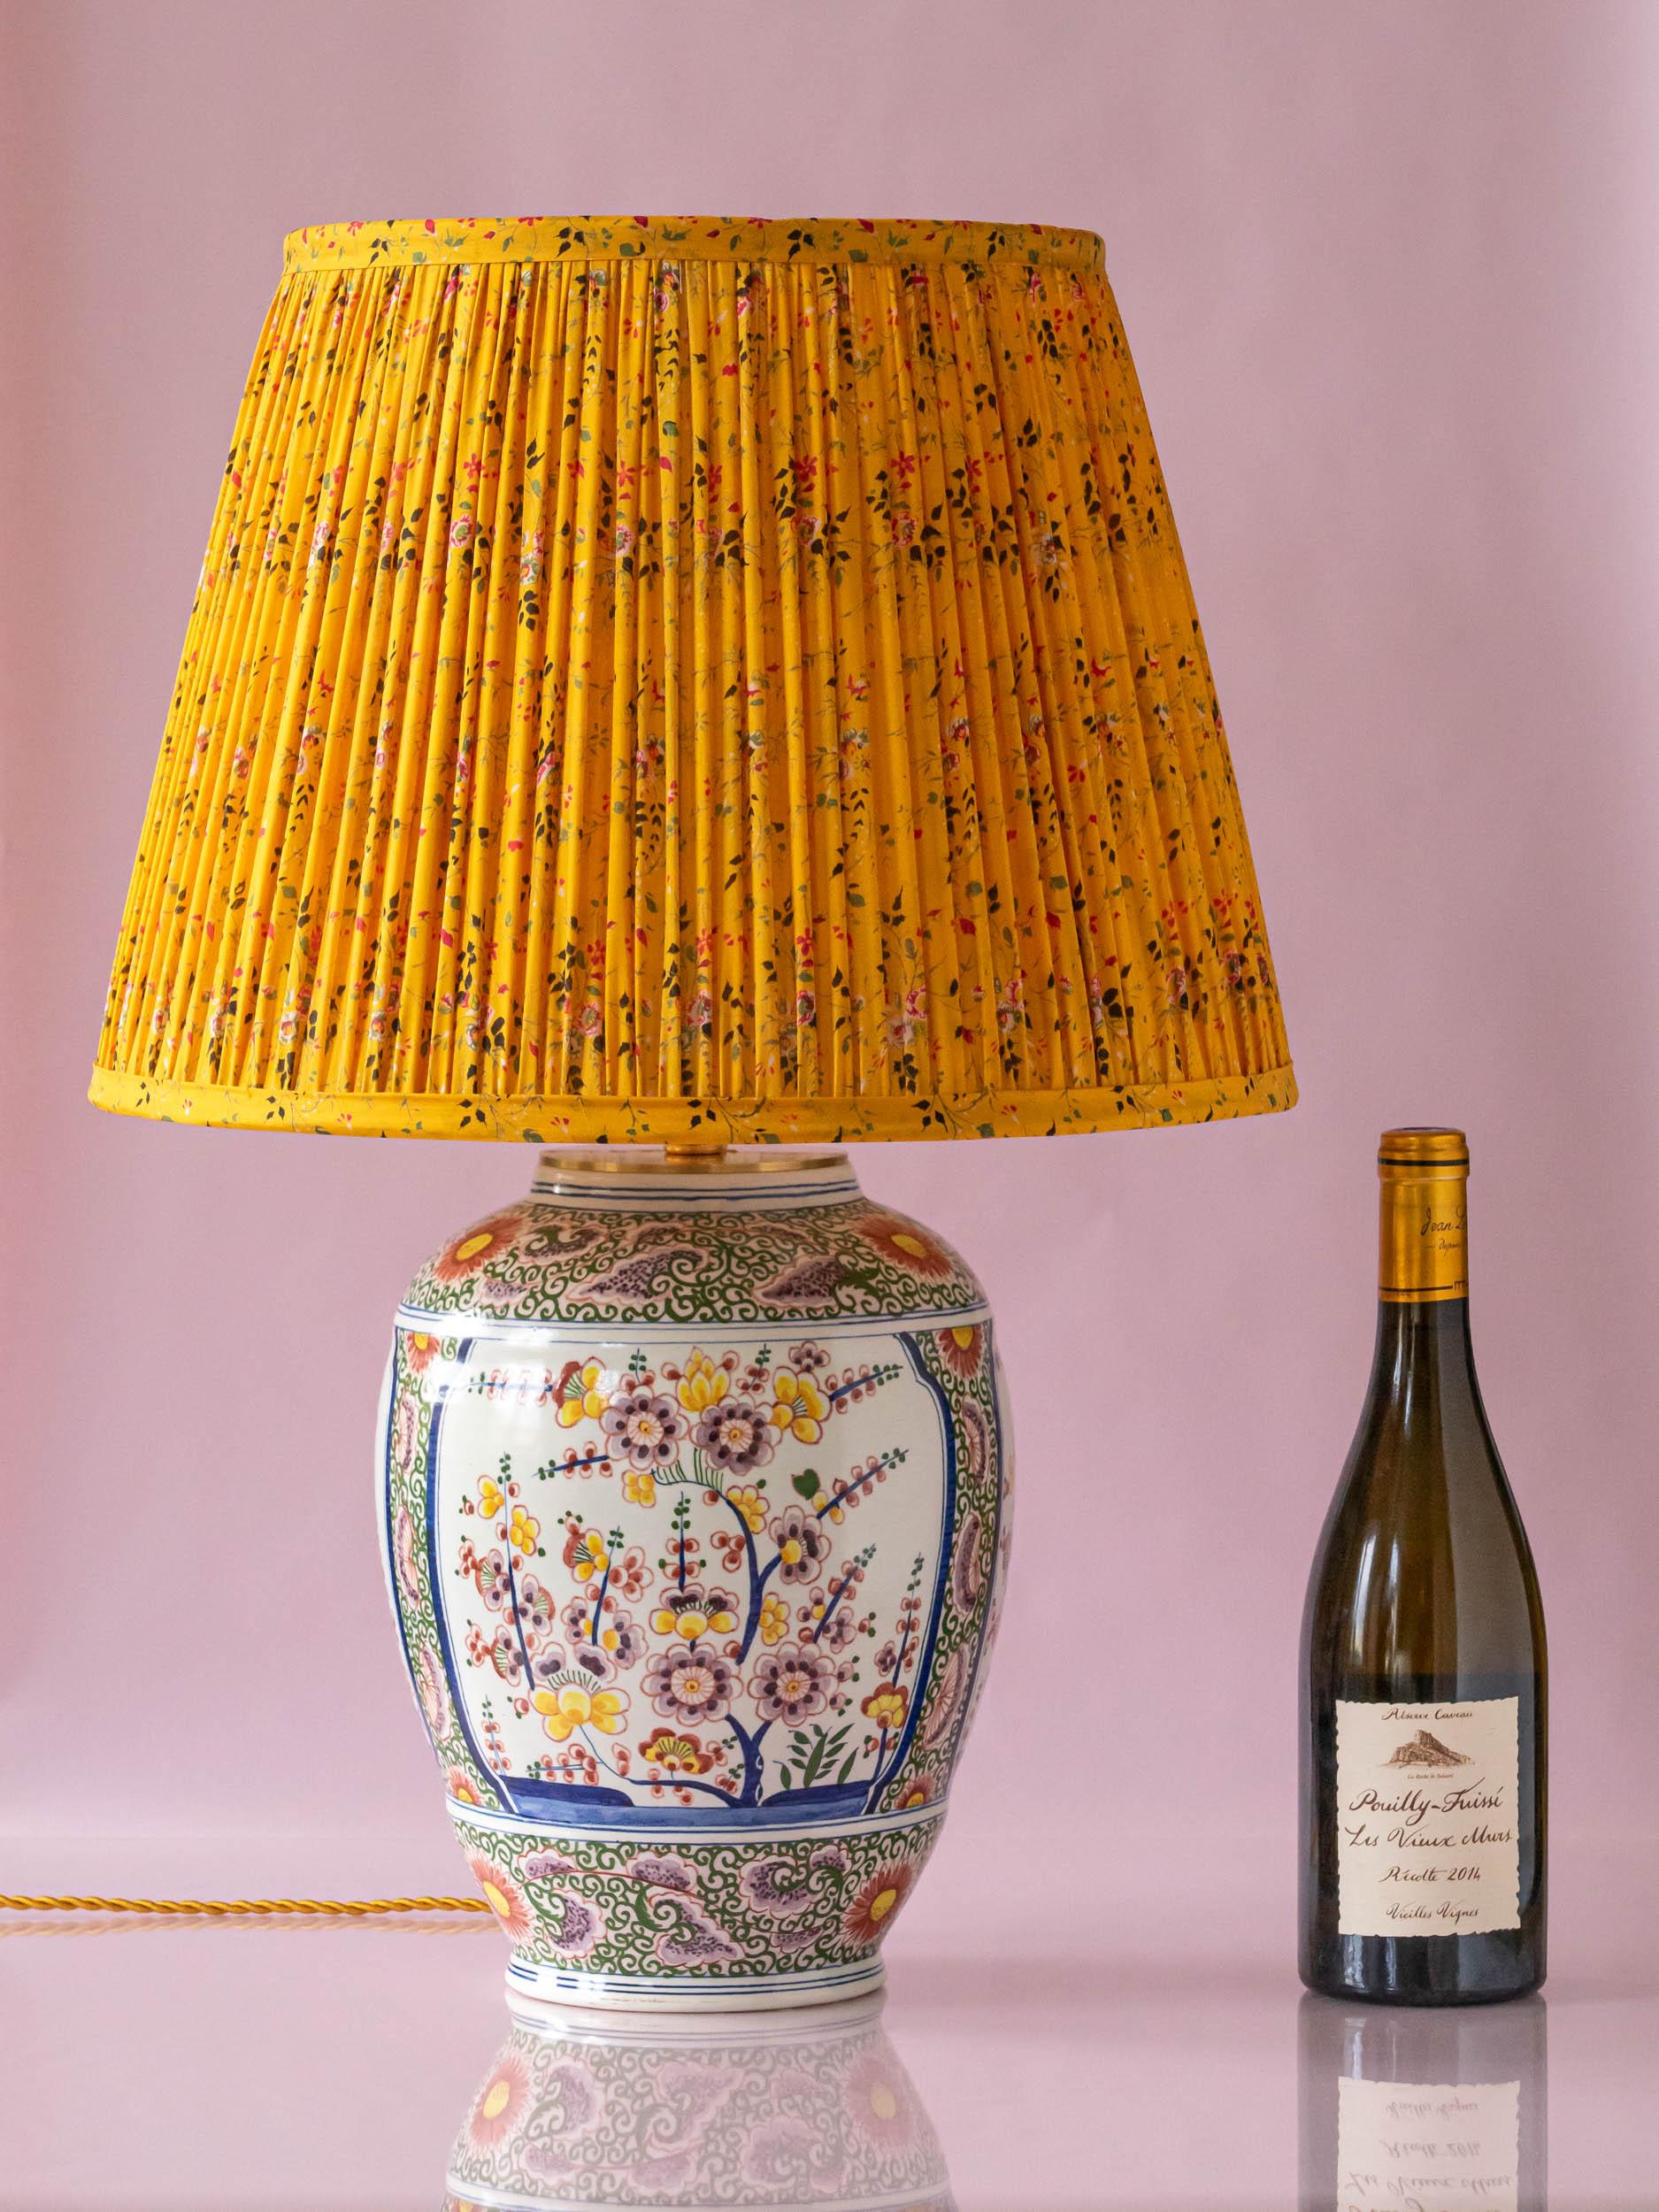 Lovingly handcrafted by Amitābha Studio in Amsterdam from an antique Boch Frères Keramis vase (circa 1872-1900) from the “la Chambre des peintres hollandais” (The Dutch Painter’s Chamber), Sakura is a one-of-a-kind table lamp. We've paired the vase